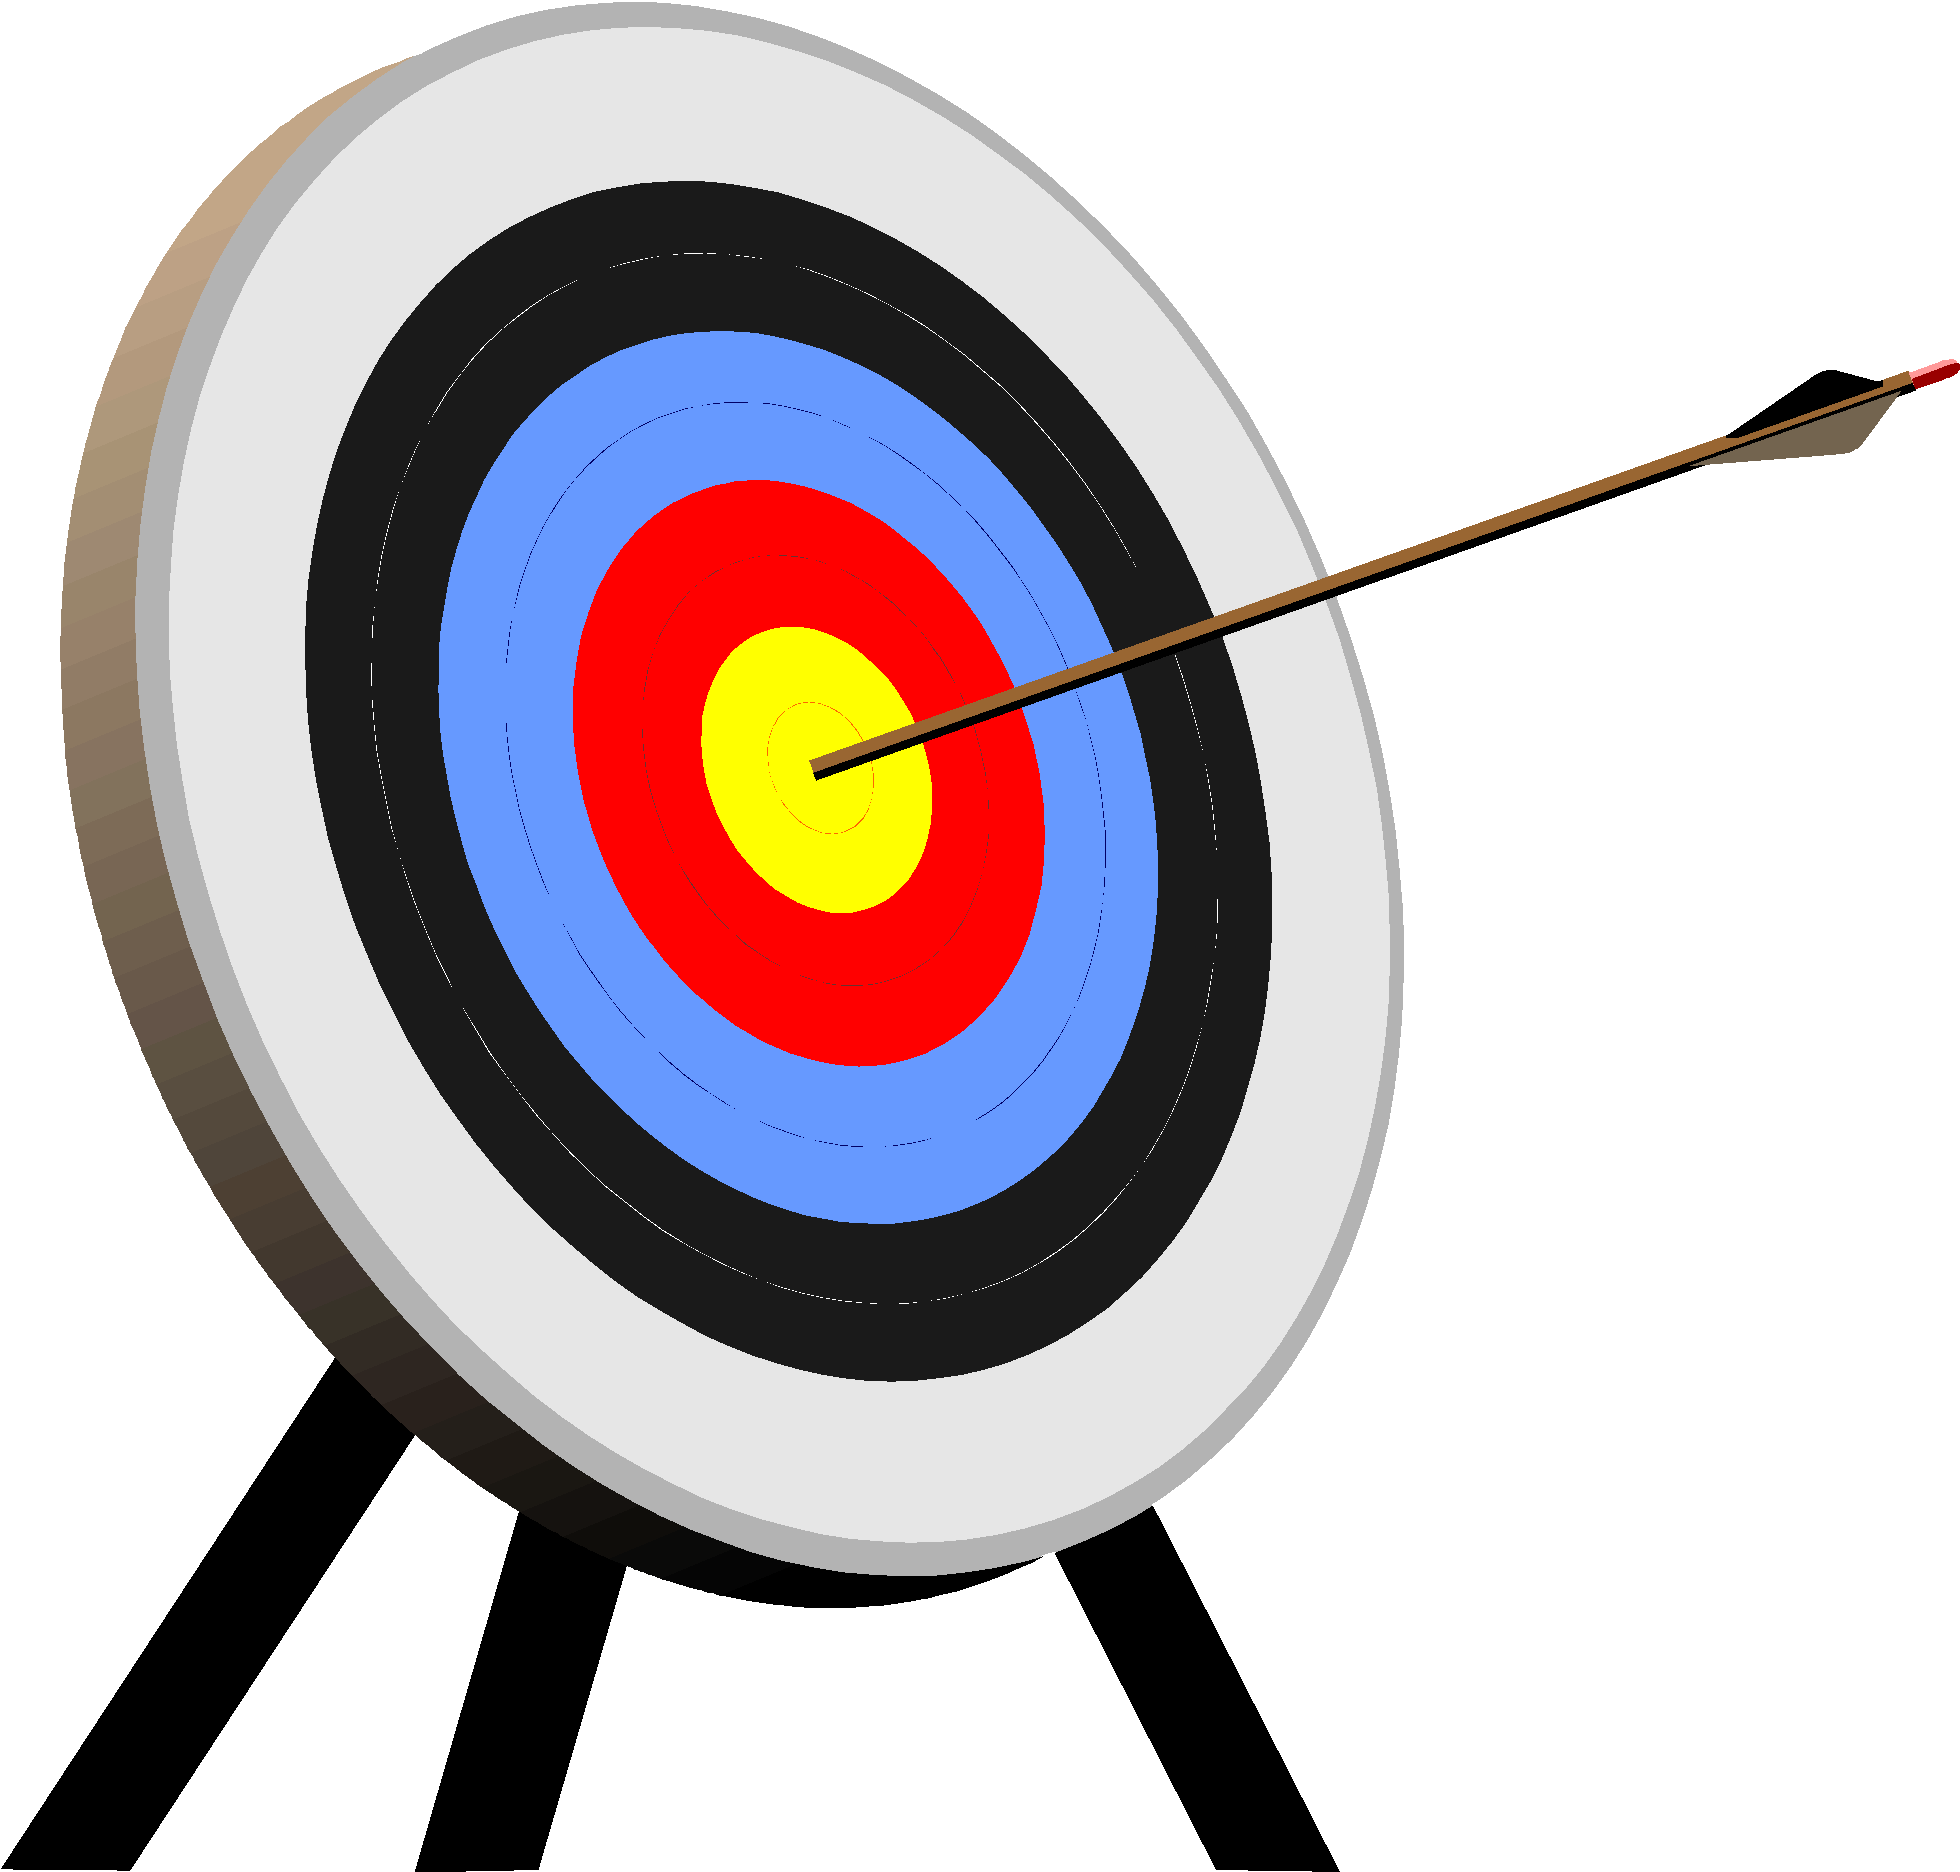 Archery 23810 Hd Wallpapers In Sports   Imagesci Com